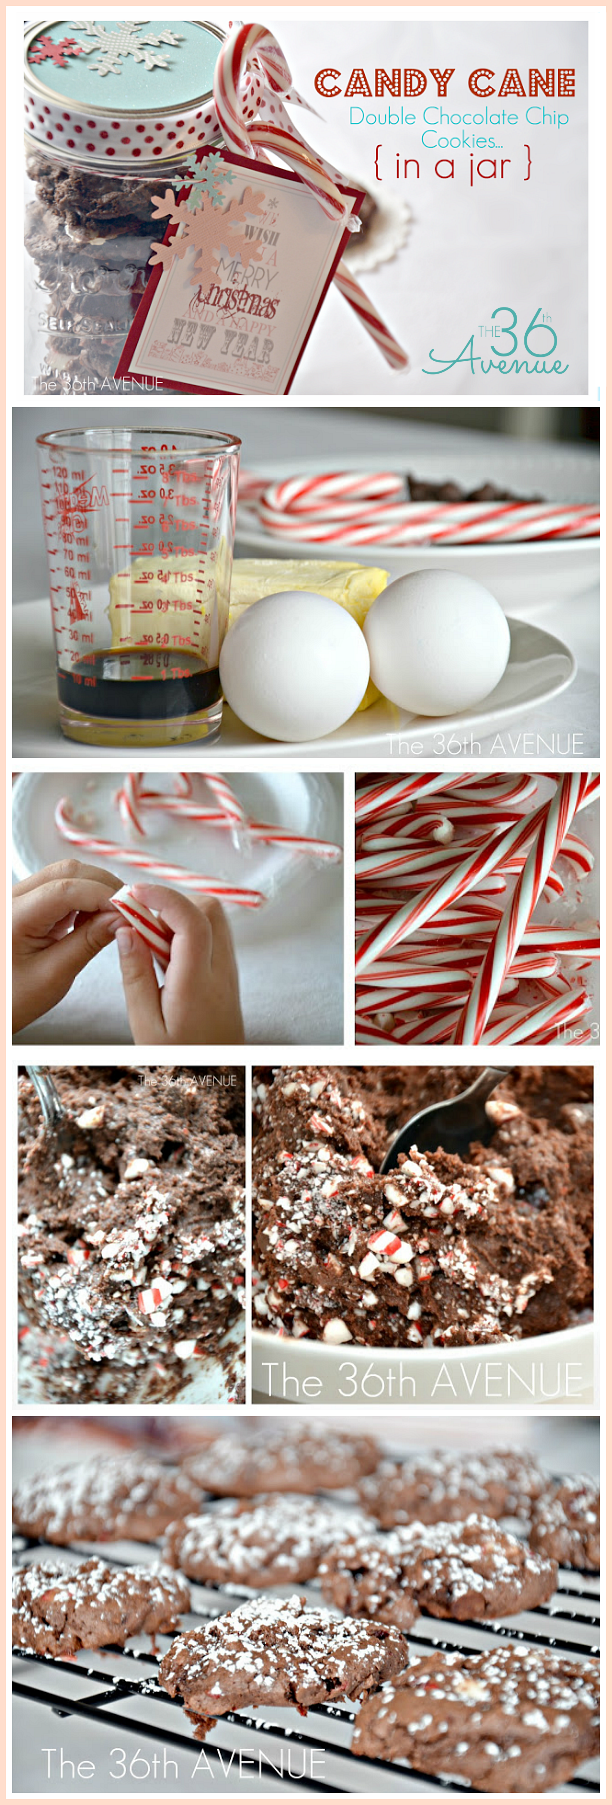 Christmas Recipes - These 25 dessert recipes are perfect for everyday snacks, to give as Christmas Edible Gifts, or to make anytime that your are craving something sweet and delicious! Surprise your family and friends with any of these yummy Christmas Treats! PIN IT NOW and make them later!